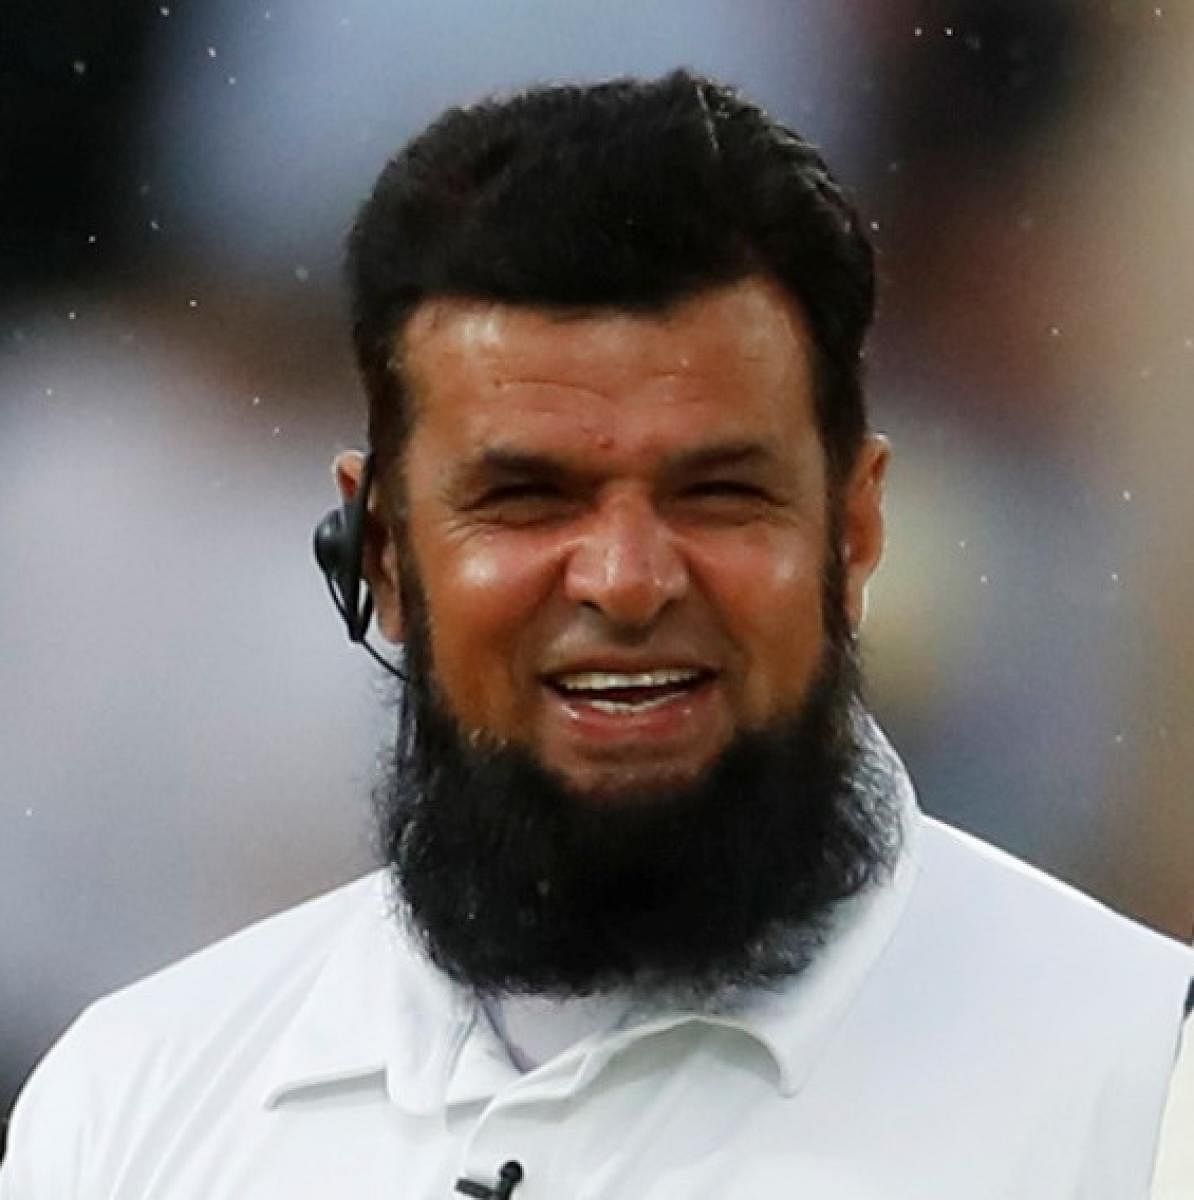 The 51-year-old, who took up umpiring after playing first-class cricket in Pakistan, is standing in his 129th Test match as an on-field umpire. 